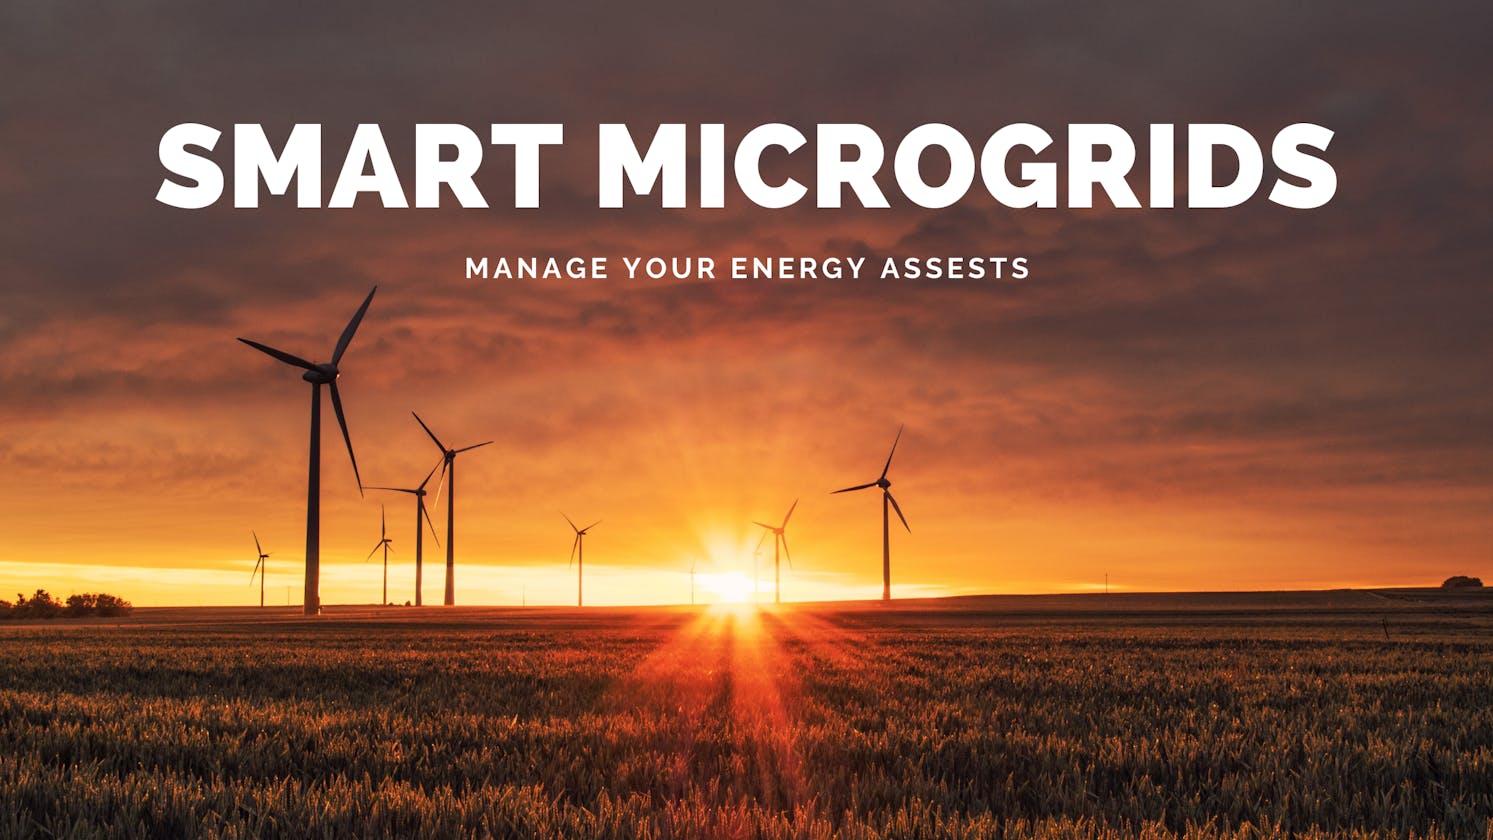 Smart Microgrids: Manage Your Energy Assets